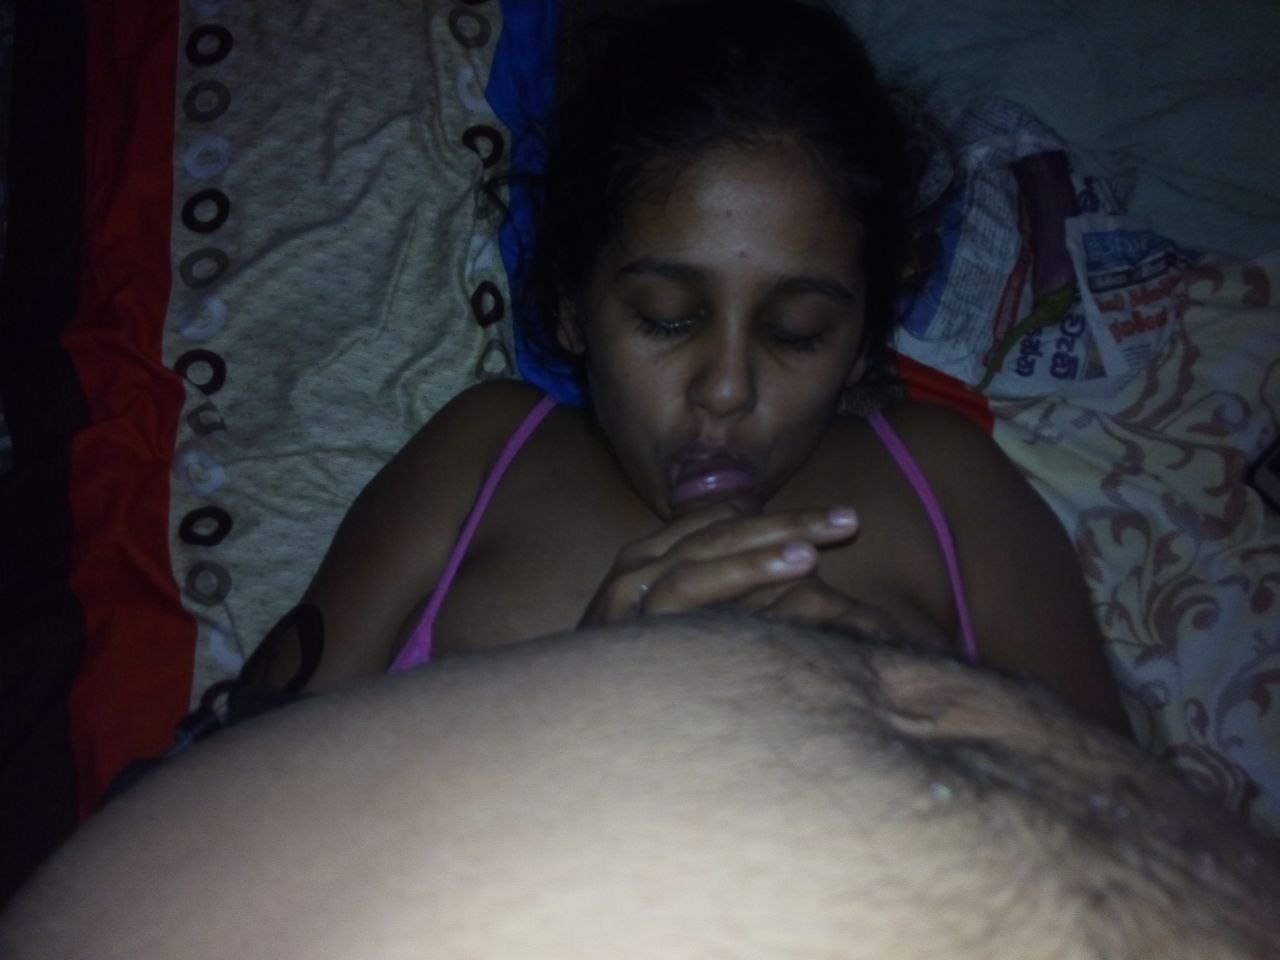 Indian Tamil hot busty girl leaked pic